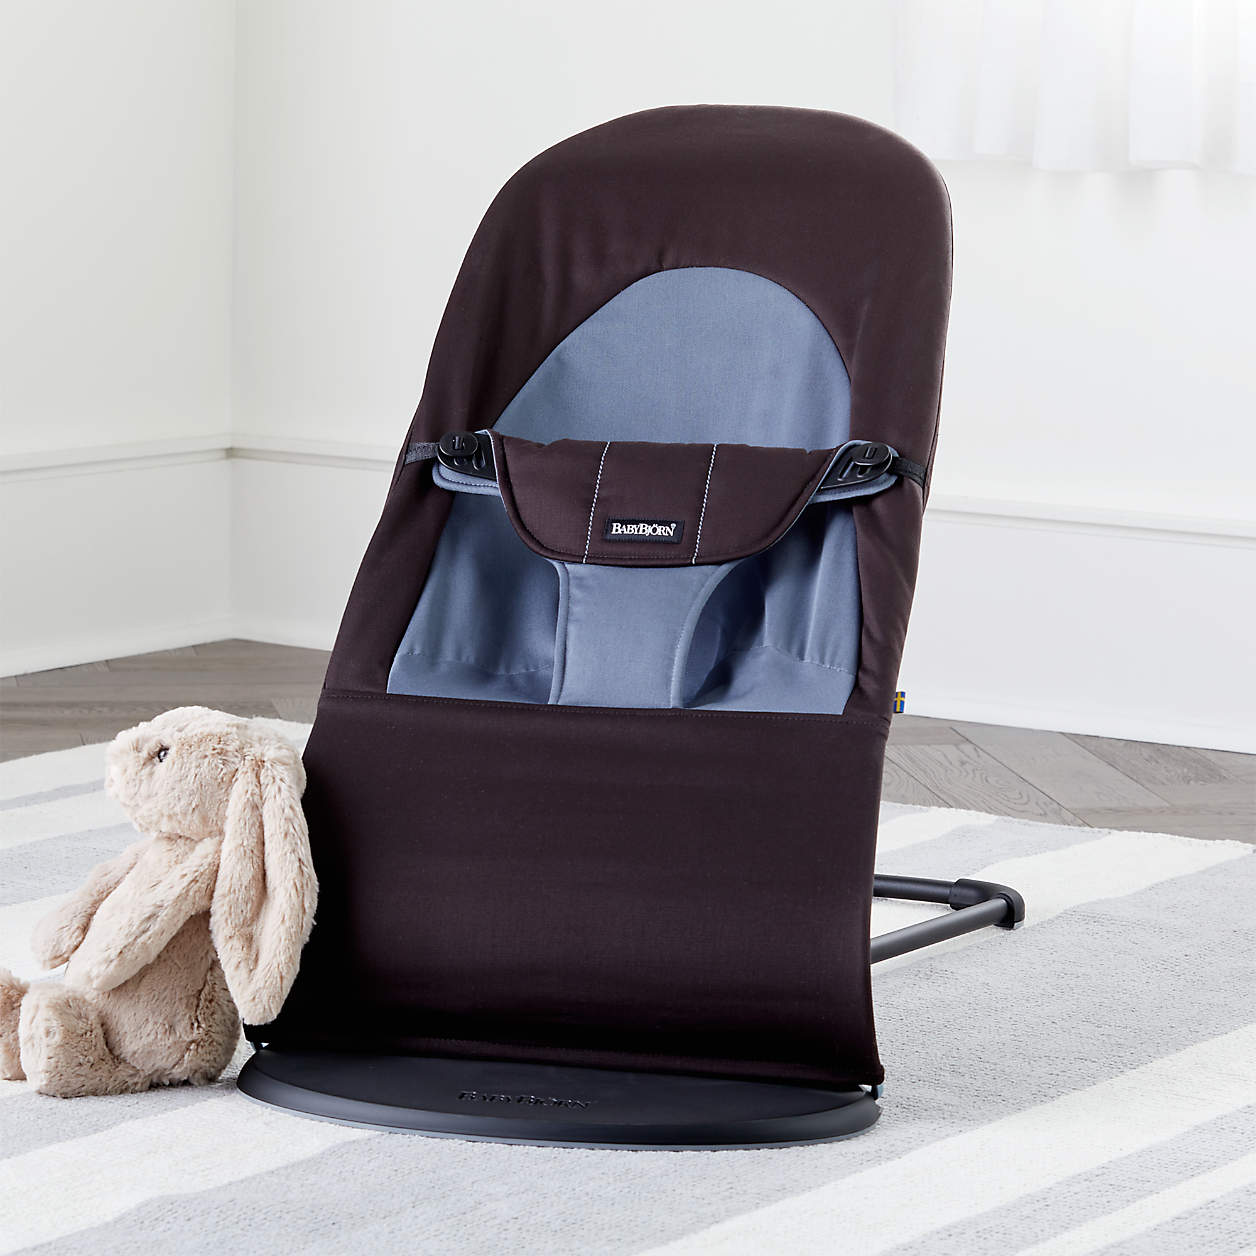 Baby Bjorn Bouncer Balance Soft + Reviews | Crate and Barrel